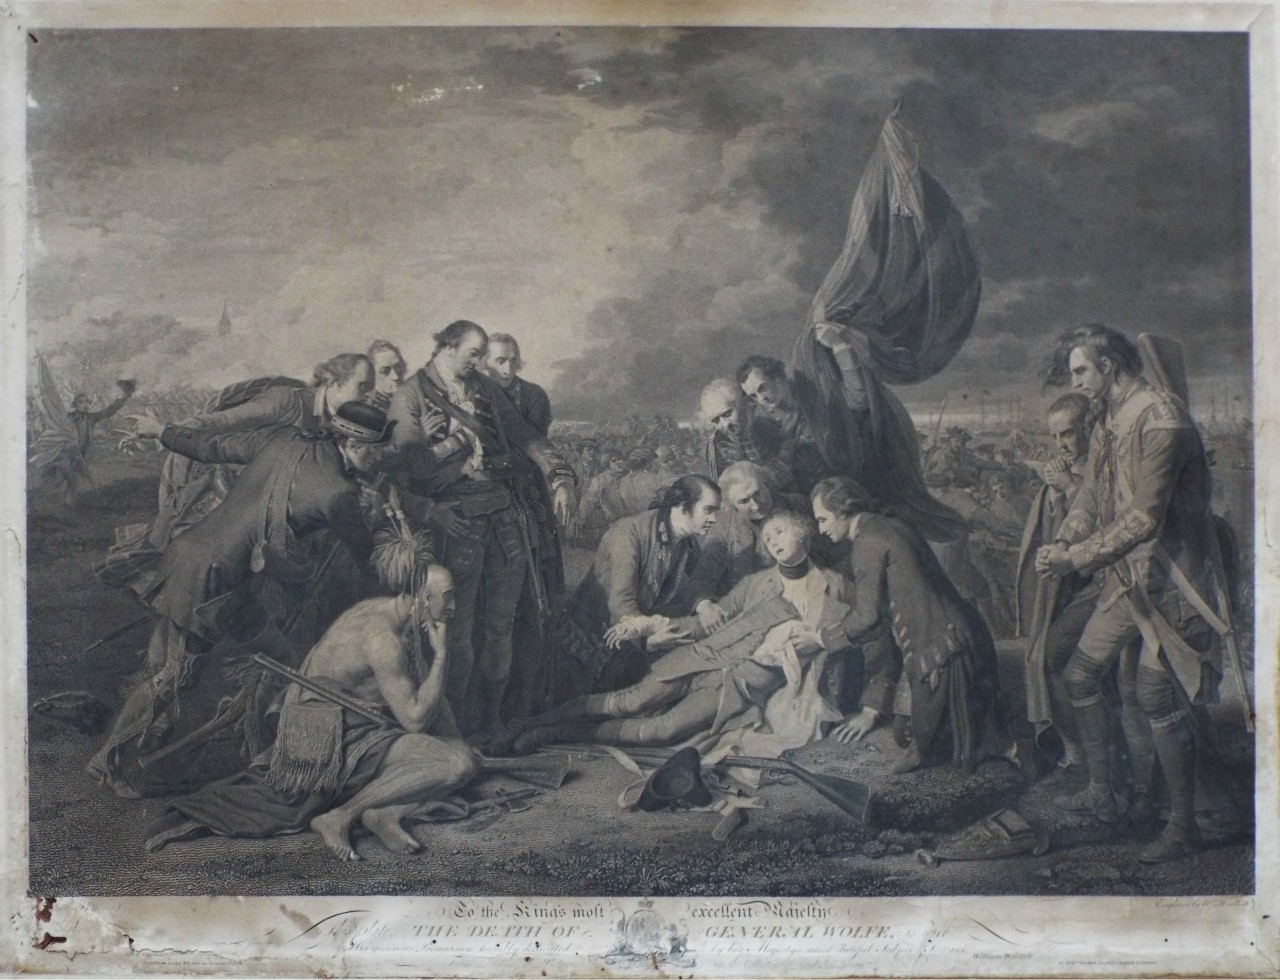 Print - To the King's most excellent Majesty, This plate, The Death of Wolfe, is with with his gracious Permission humbly dedicated by his Majesty's most dutiful Subject Servant, William Woollett.